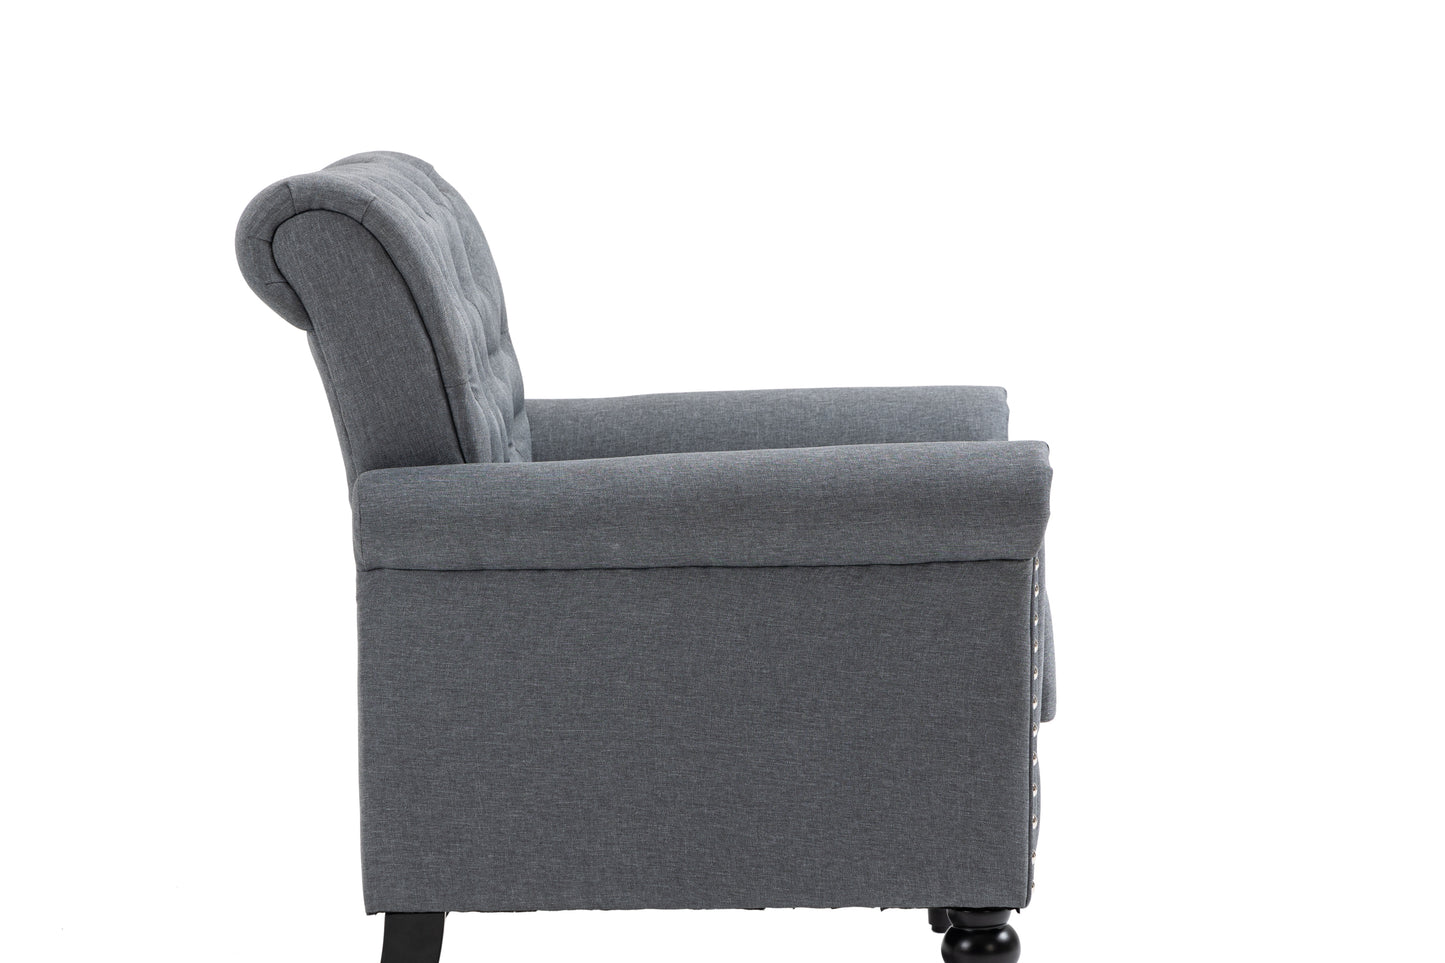 Mid-Century Modern Accent Chair, Linen Armchair w/Tufted Back/Wood Legs, Upholstered Lounge Arm Chair Single Sofa for Living Room Bedroom, Gray